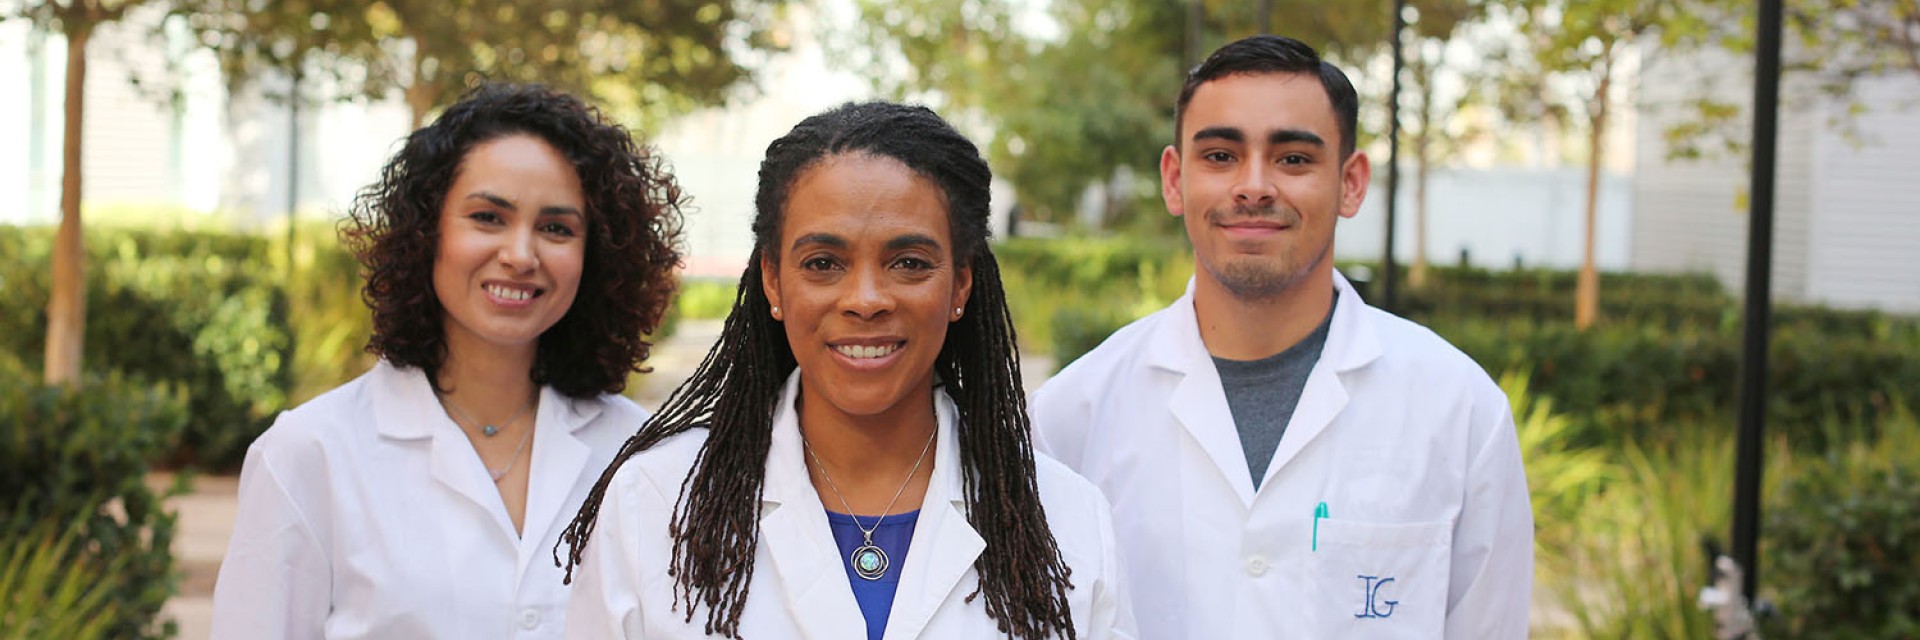 Students with White Lab Coats standing next to Dr. Foster in a courtyard